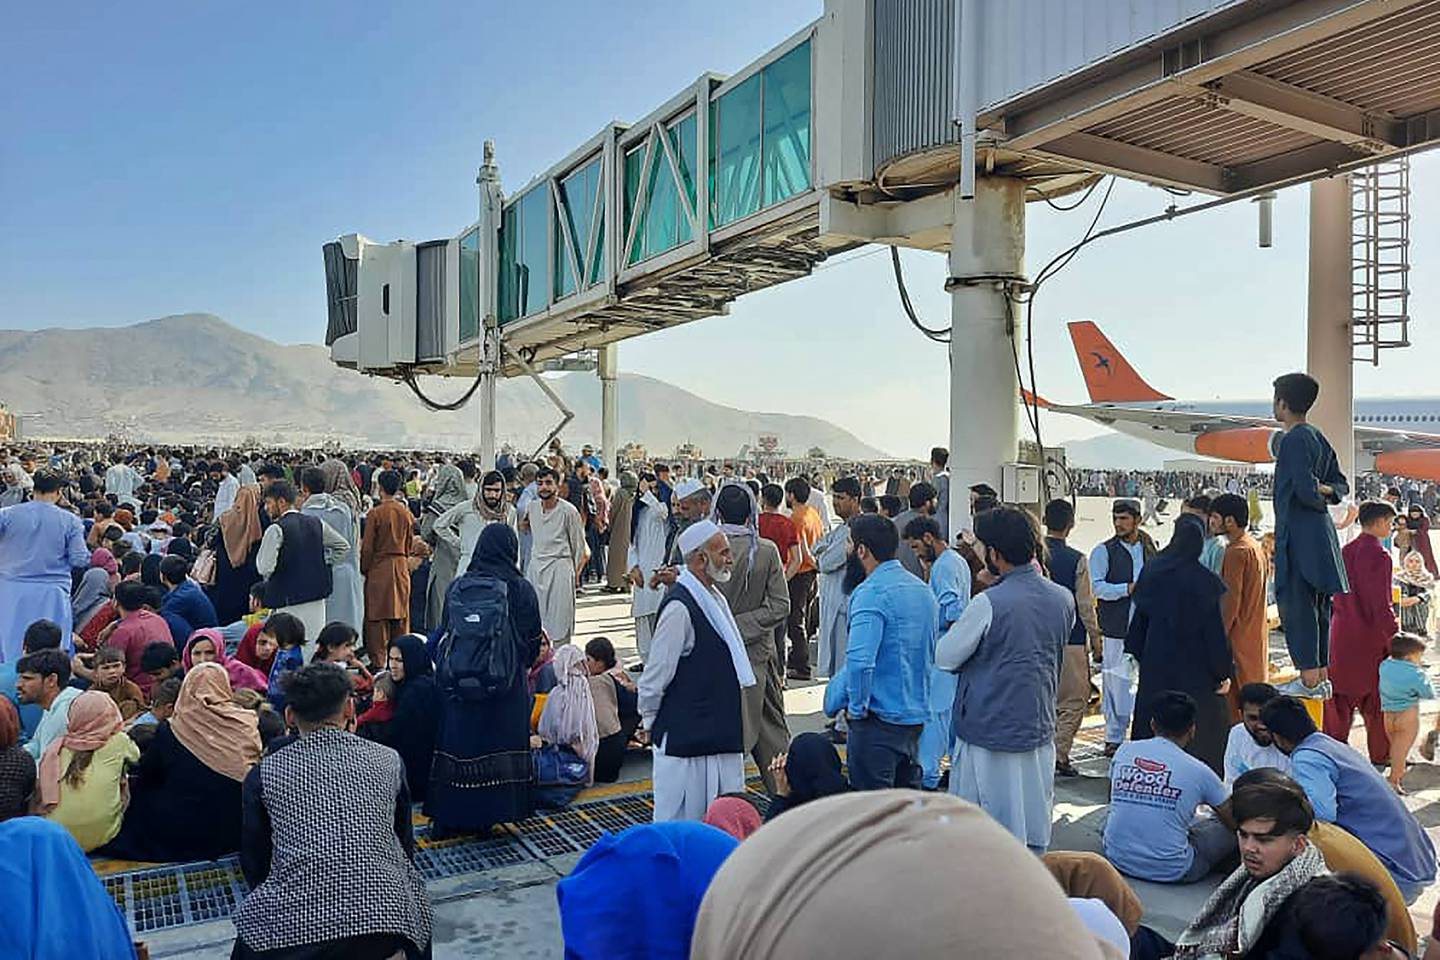 Afghans crowd at the tarmac of the Kabul airport in August 2021 in an attempt to evacuate as the Taliban take control of the country. AFP